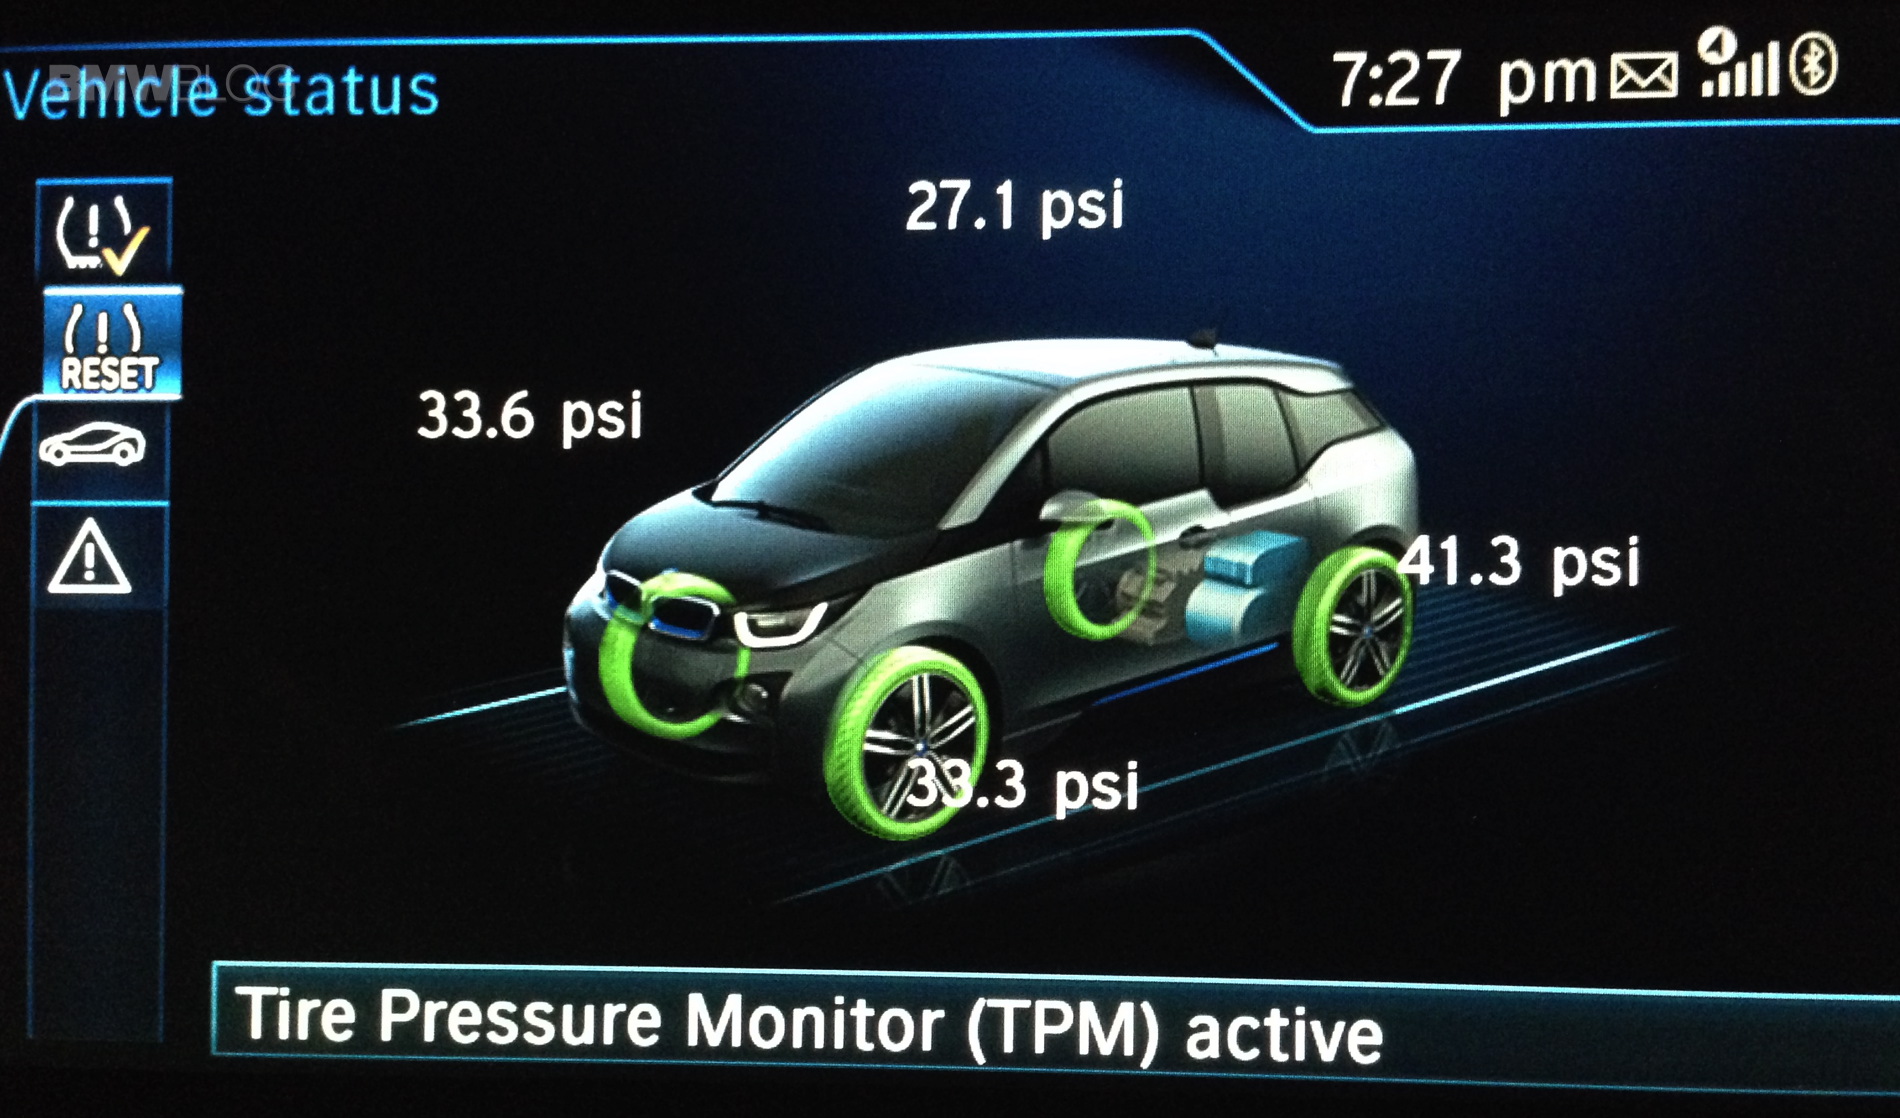 5 Quick Tips: TPMS, Tire Inflation, Safety